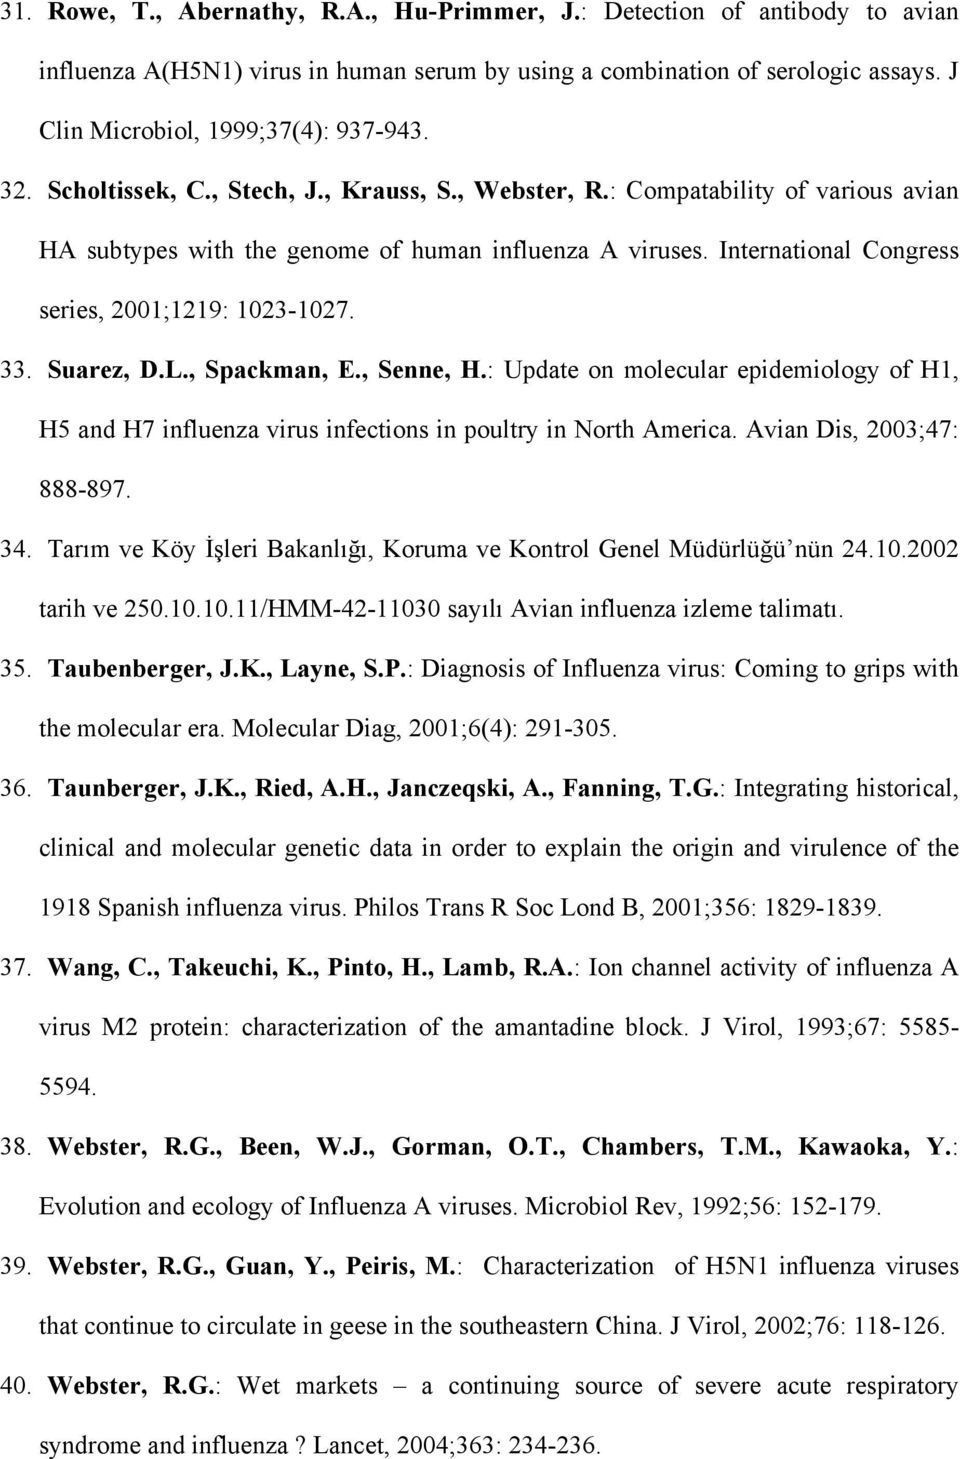 33. Suarez, D.L., Spackman, E., Senne, H.: Update on molecular epidemiology of H1, H5 and H7 influenza virus infections in poultry in North America. Avian Dis, 2003;47: 888-897. 34.